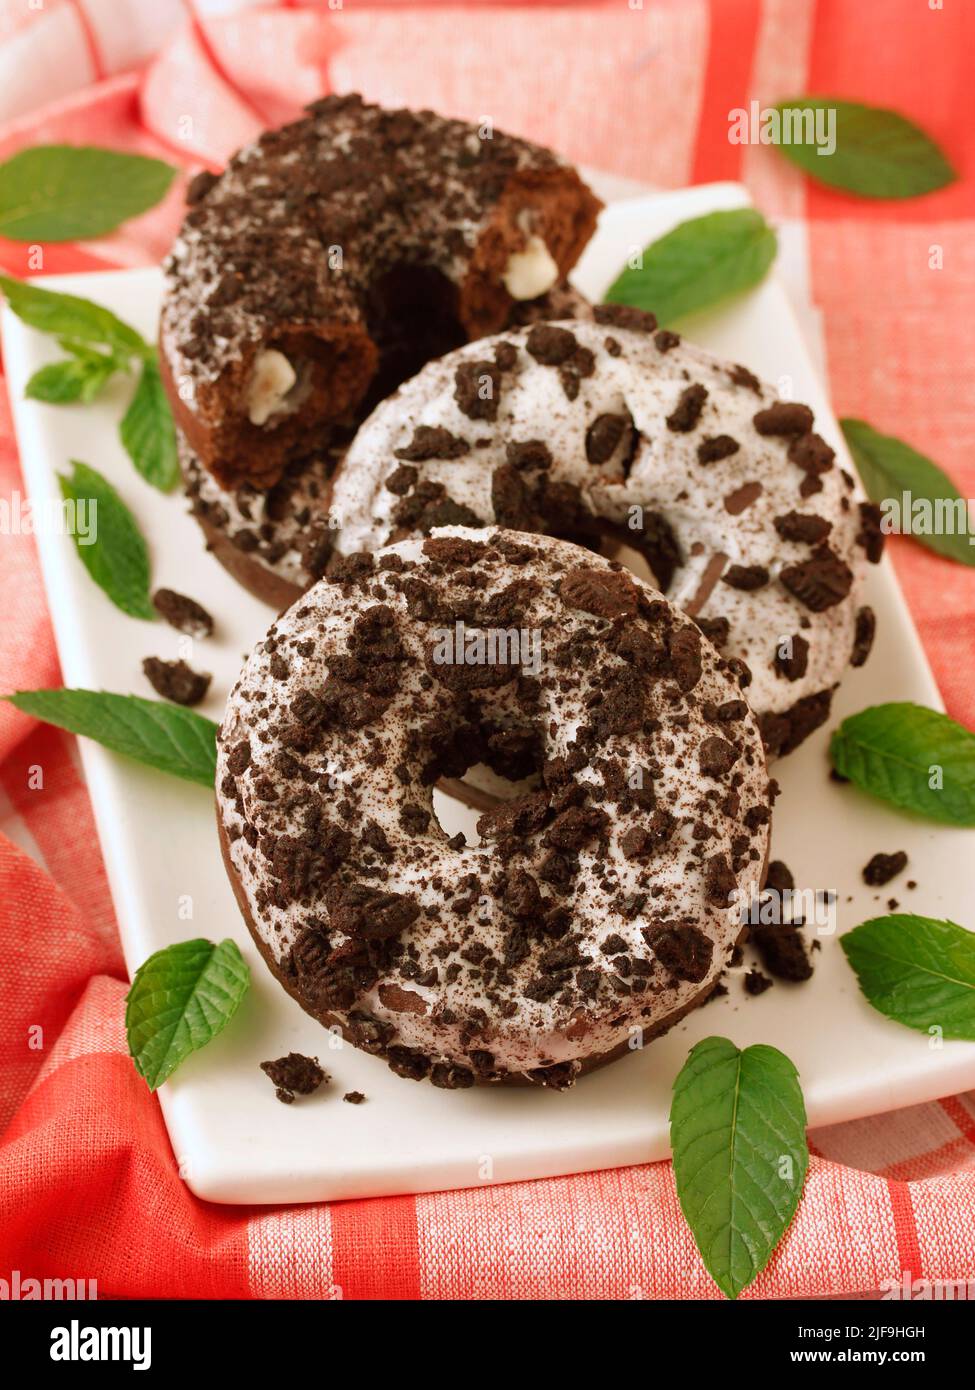 Donuts with chocolate and cream. Stock Photo